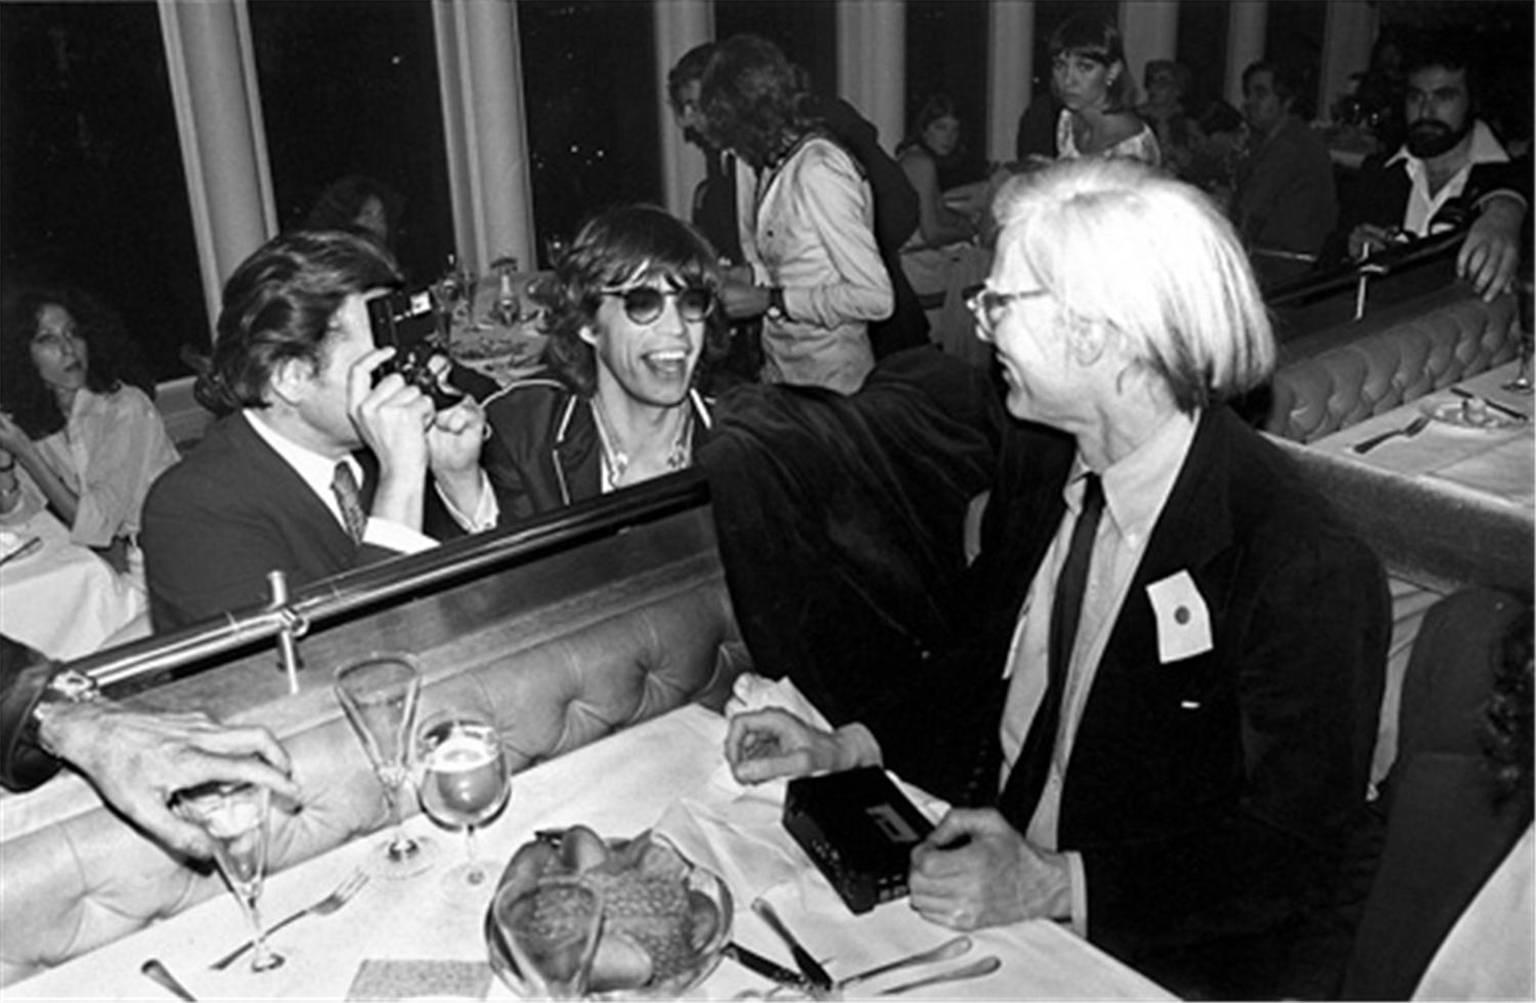 Mick Rock Black and White Photograph - Mick Jagger and Andy Warhol NYC, 1976